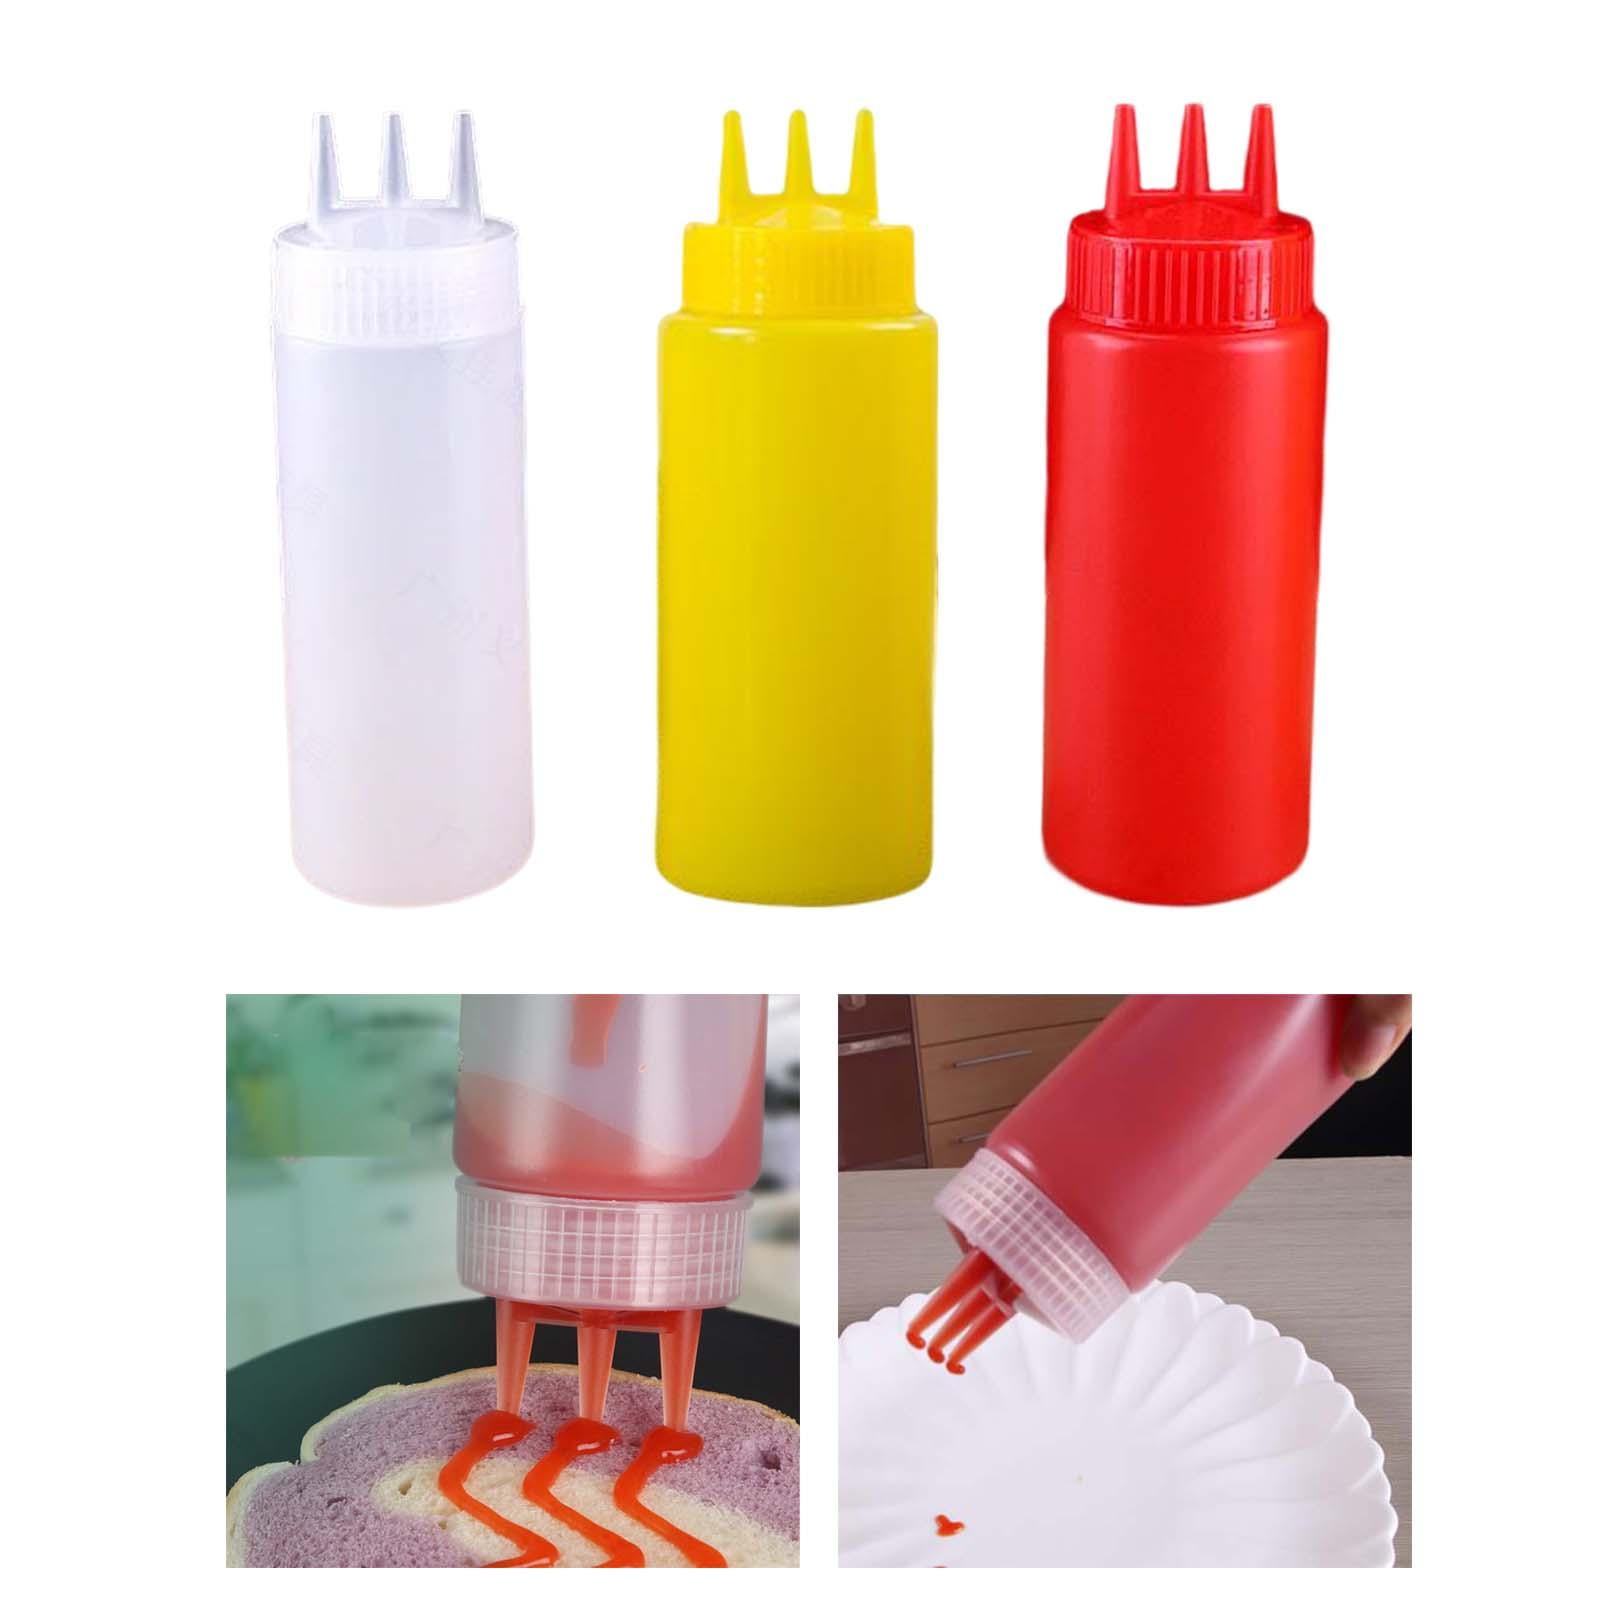 Tohuu Squirt Bottles For Sauces 5 Holes Squeeze Bottles for Liquids  Multipurpose Kitchen Gadgets with Sealing Cap suitable for Sauces Dressing  Oil Jam right 